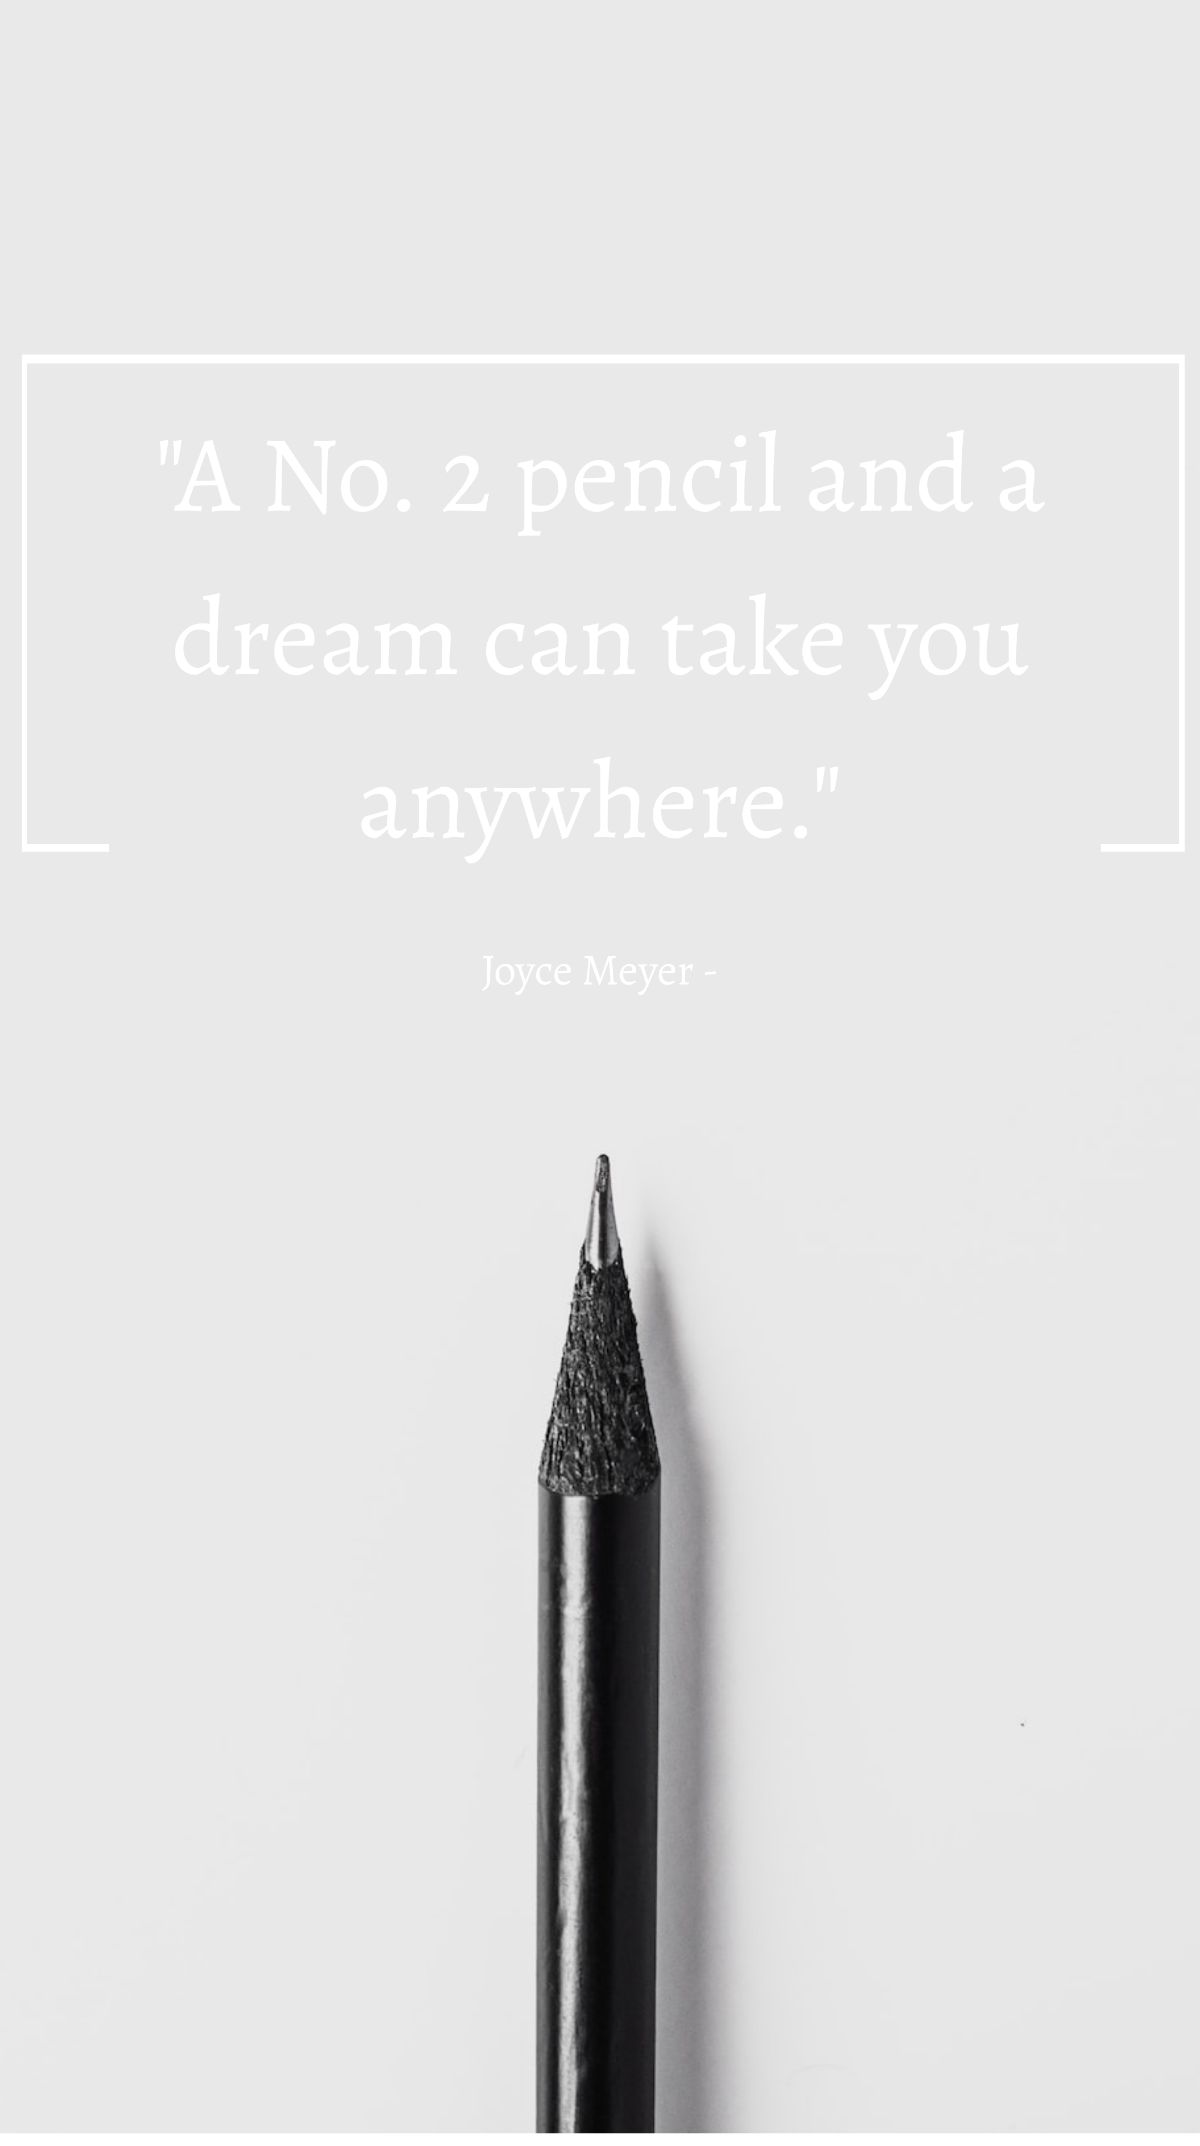 Joyce Meyer - A No. 2 pencil and a dream can take you anywhere. Template